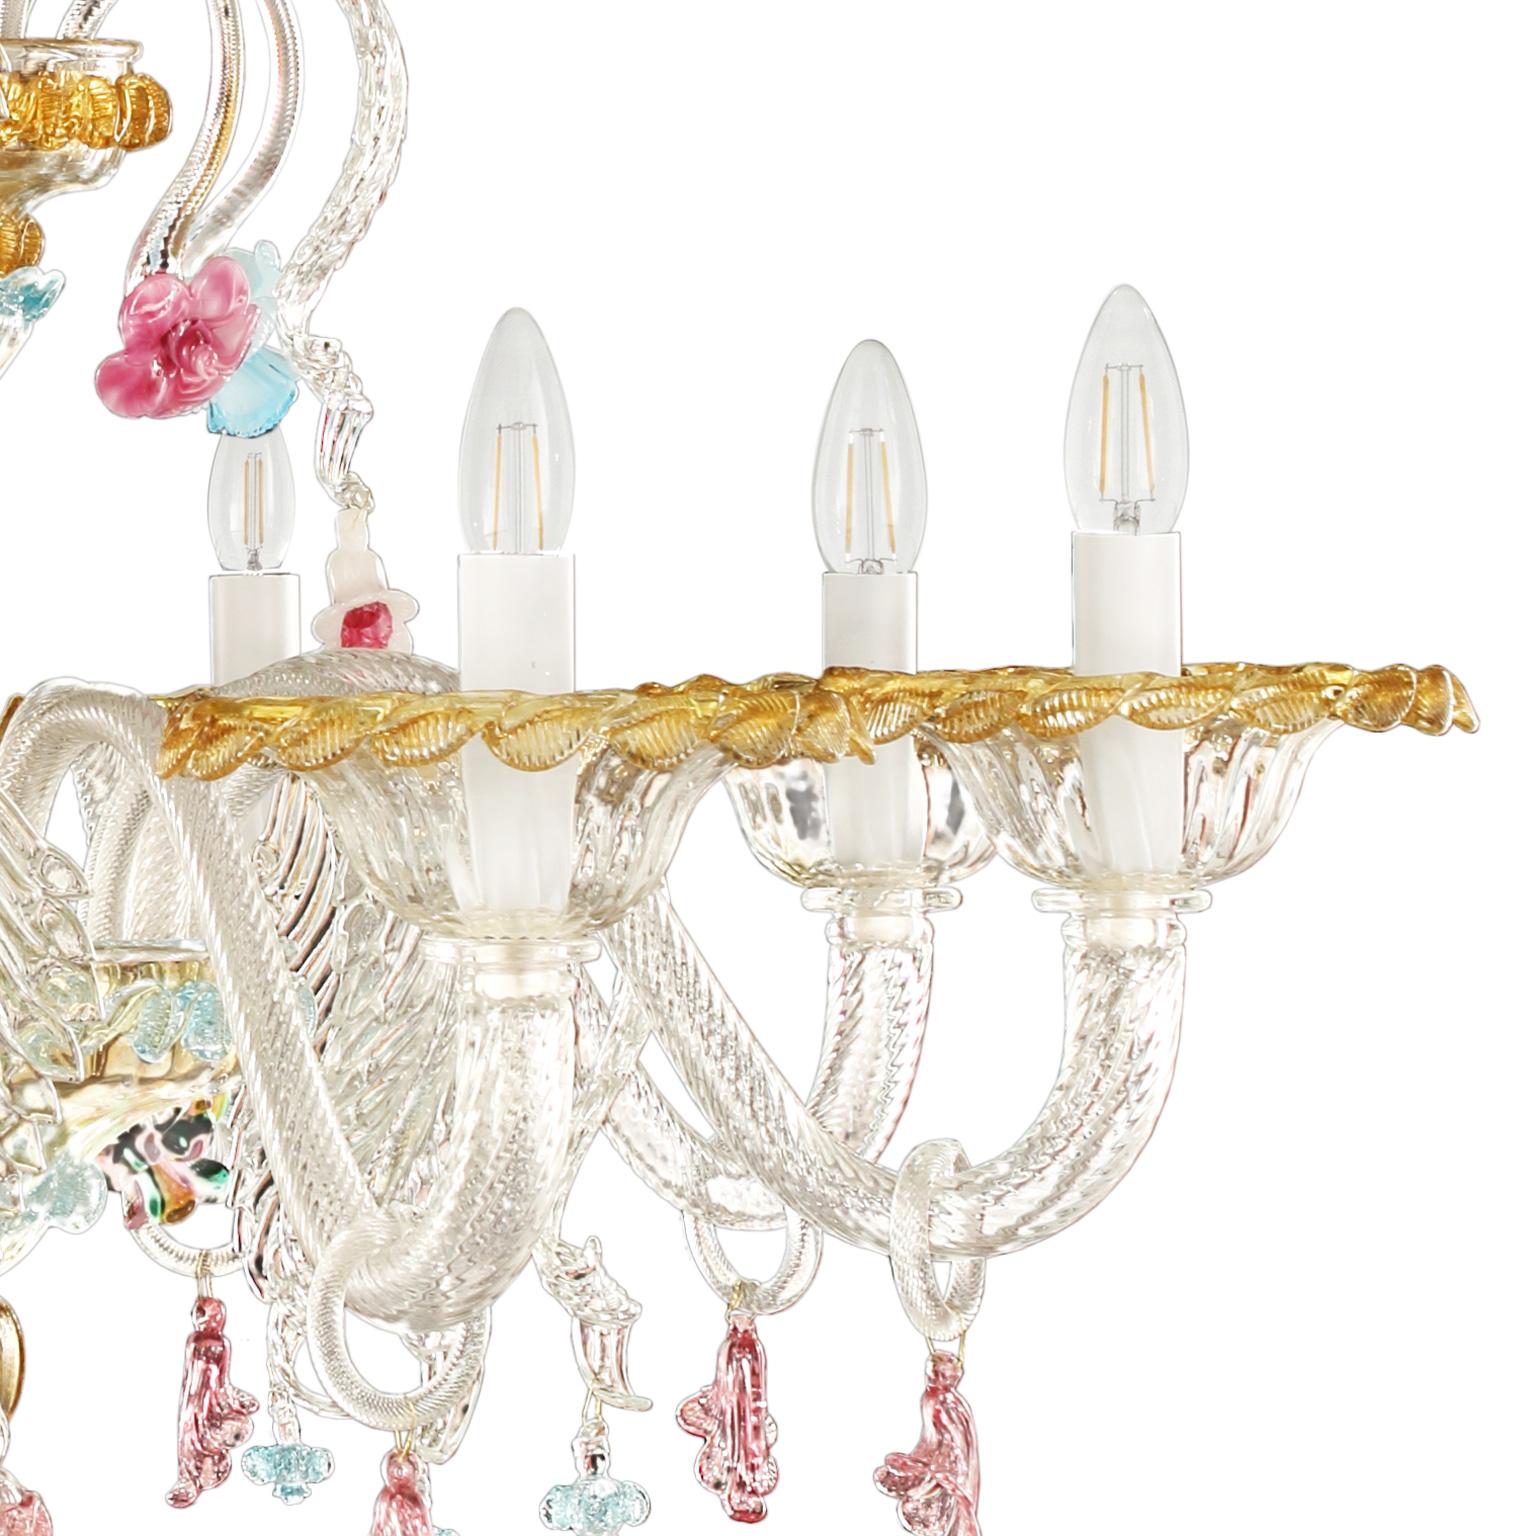 Toffee chandelier 8 arms, crystal Murano glass, multicolour details by Multiforme.
The artistic glass chandelier toffee is an elegant and delicate lighting work, colored with pastel tones. The structure is a combination of well-proportioned volumes